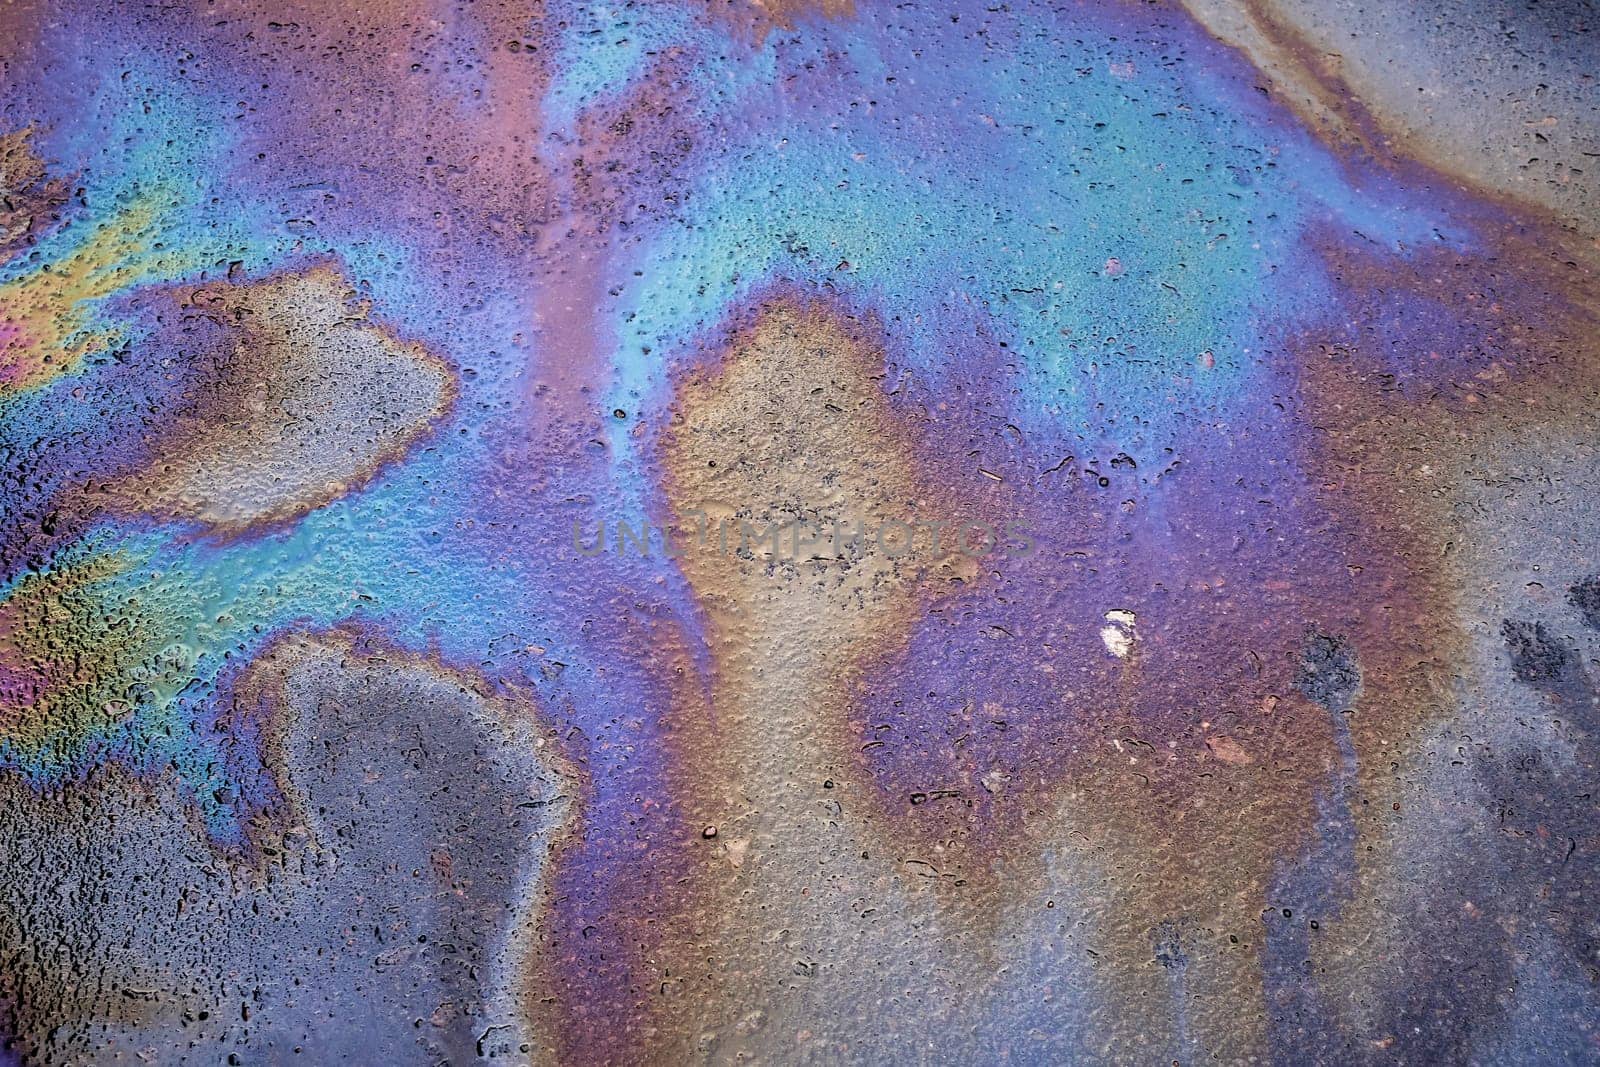 Multi-colored toxic stains of spilled gasoline on wet asphalt during the rain. Rain washed away car oil or fuel flowing from a faulty car in a parking lot.